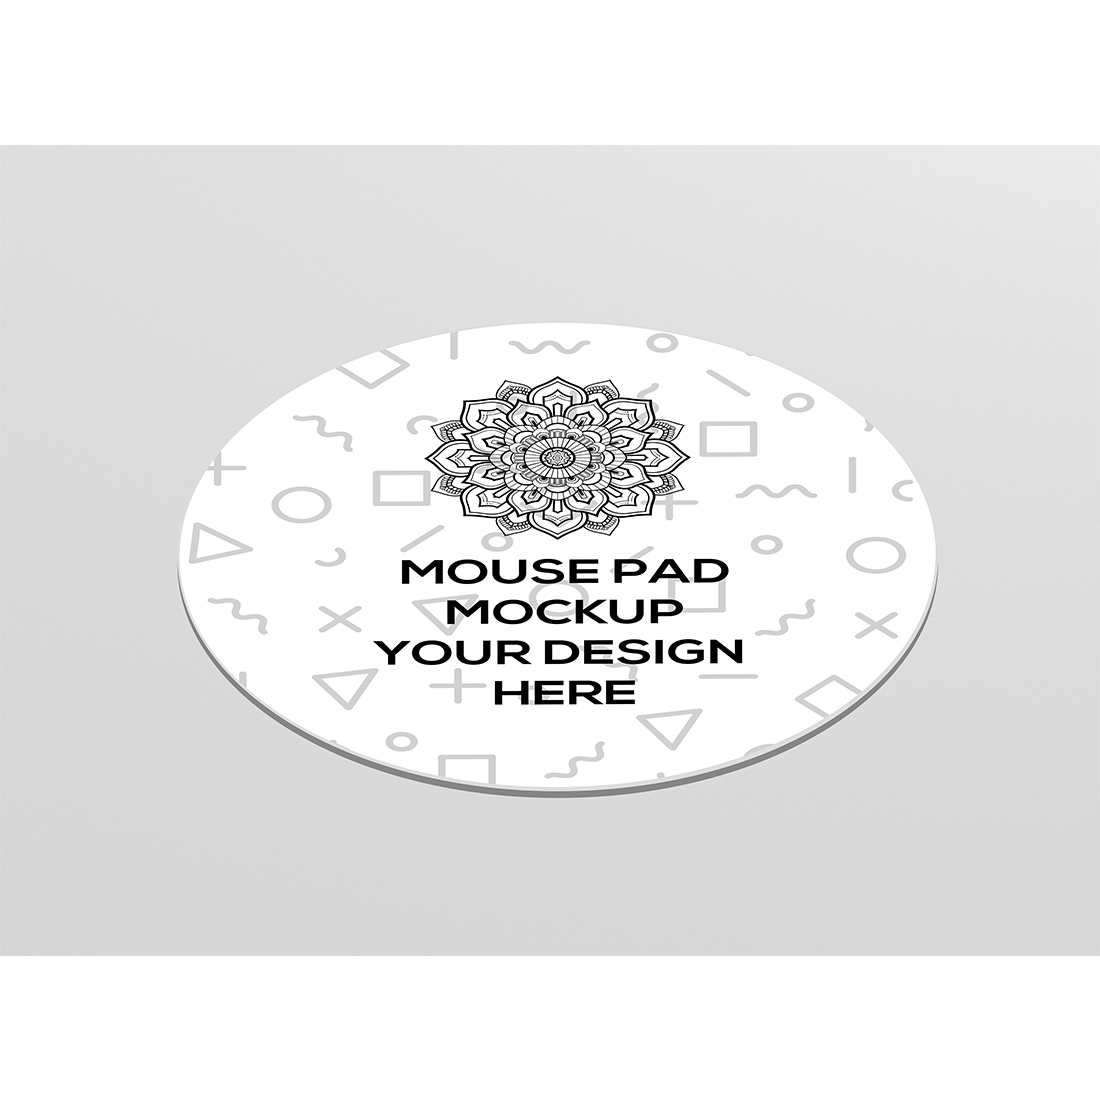 Mouse Pad Mockup cover image.